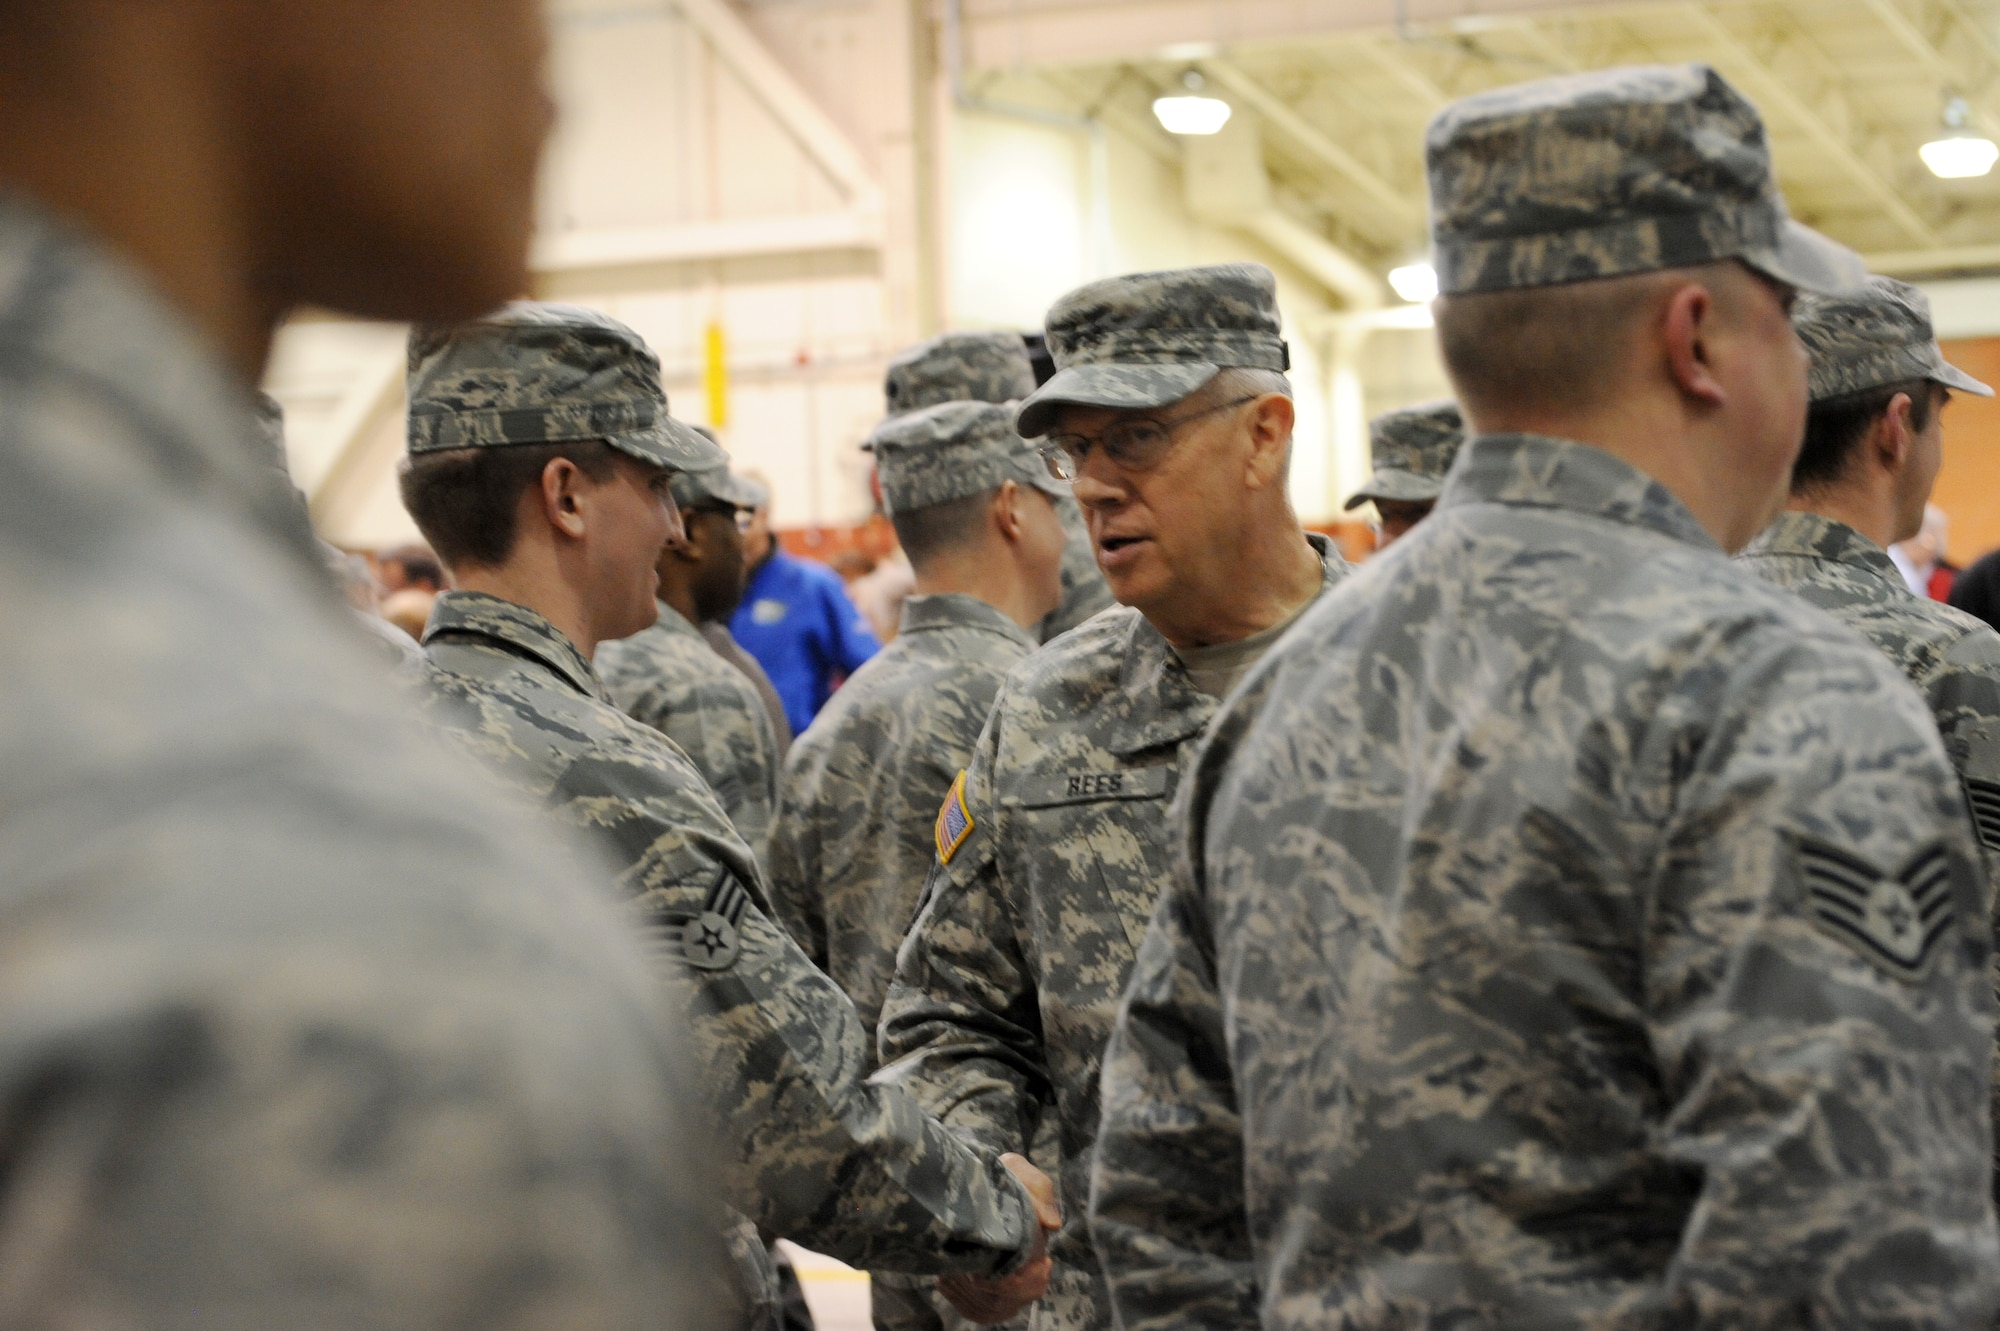 Oregon Major General Raymond F. Rees, Adjutant General, Oregon, meets the Airmen departing for the Middle East after the mobilization ceremony for the 116th Air Control Squadron, held at the Portland Air Guard Base in Portland, Ore., Mar. 4.  Kitzhaber, Maj. Gen. Raymond F. Rees, Adjutant General, Oregon; Brig. Gen. Steven Gregg, Oregon Air National Guard Commander; Congressman David Wu (OR-District 1), and other dignitaries, along with hundreds of family, friends, fellow Airmen and Soldiers attended the event.  The unit's Airmen will deploy to the Middle East in support of Air Forces Central (CENTAF), where they will perform Air Battle Management missions for four months.  (U.S. Air Force photograph by Tech. Sgt. John Hughel, 142nd Fighter Wing Public Affairs)